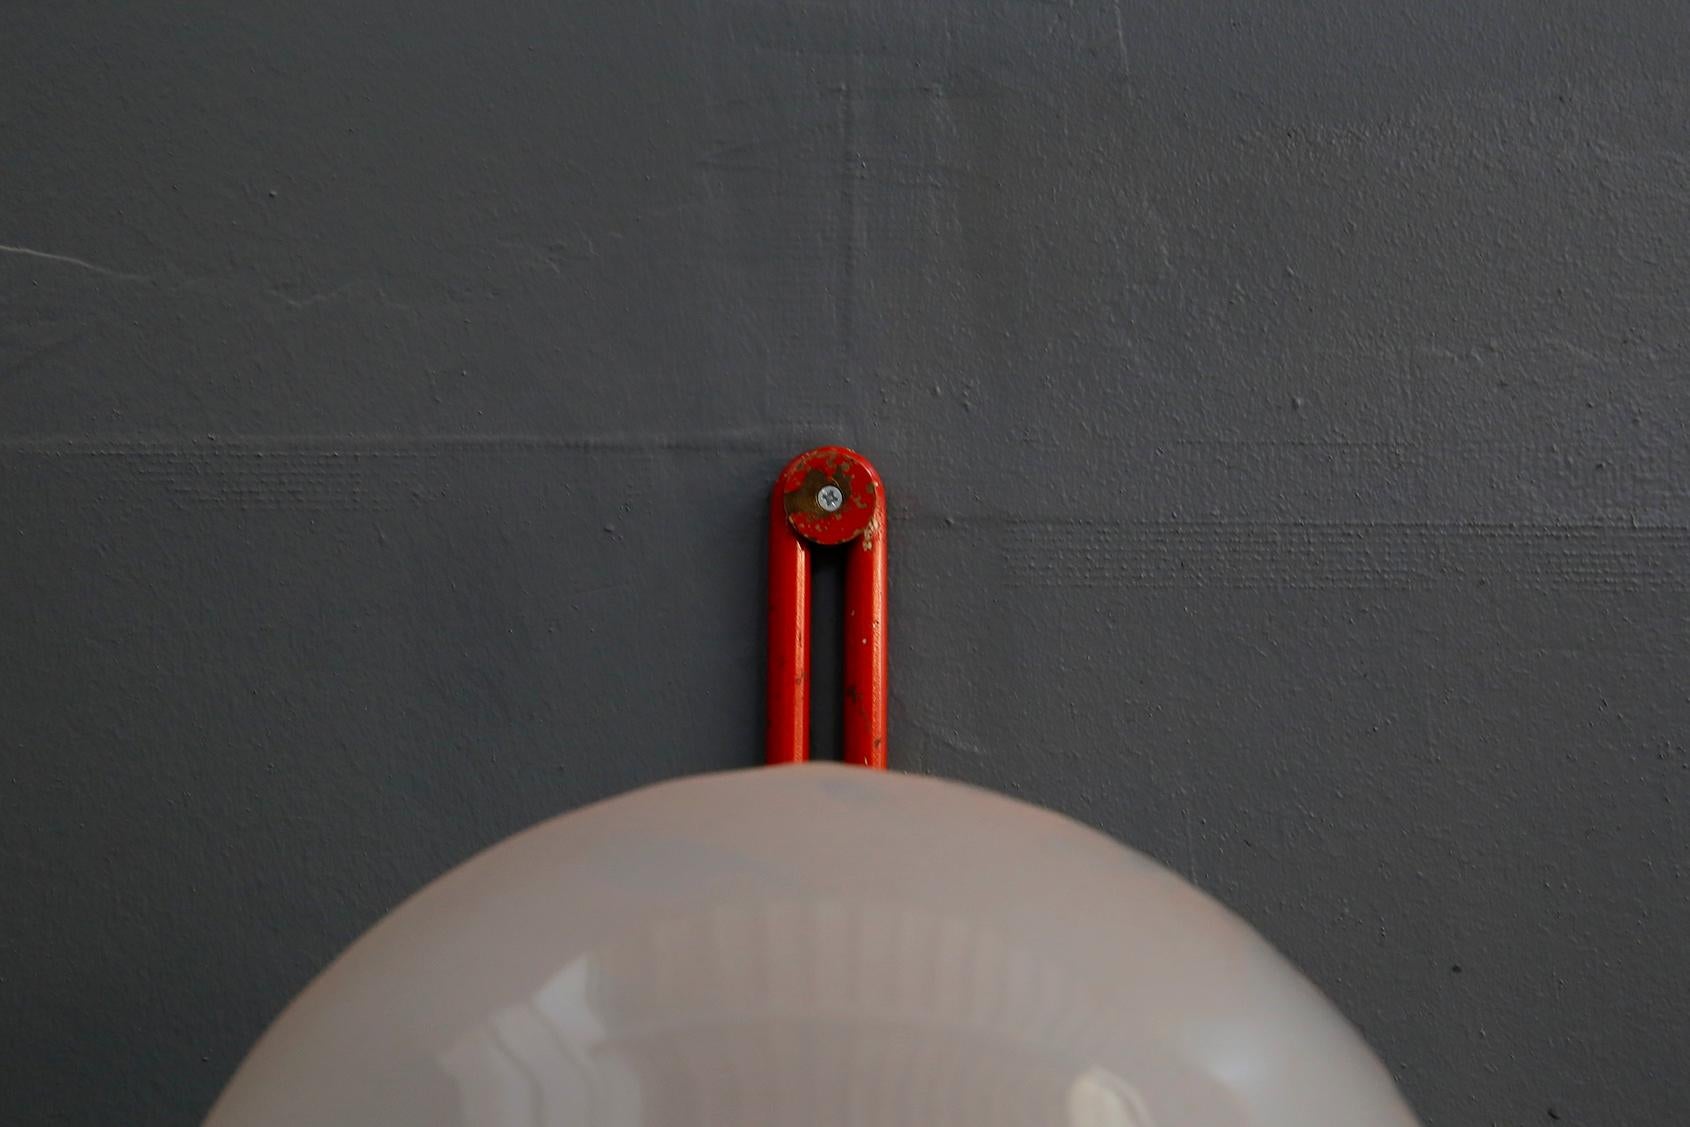 Italian Gino Sarfatti Wall Lamp for Arteluce in Red Aluminium and Glass, Published 1950s